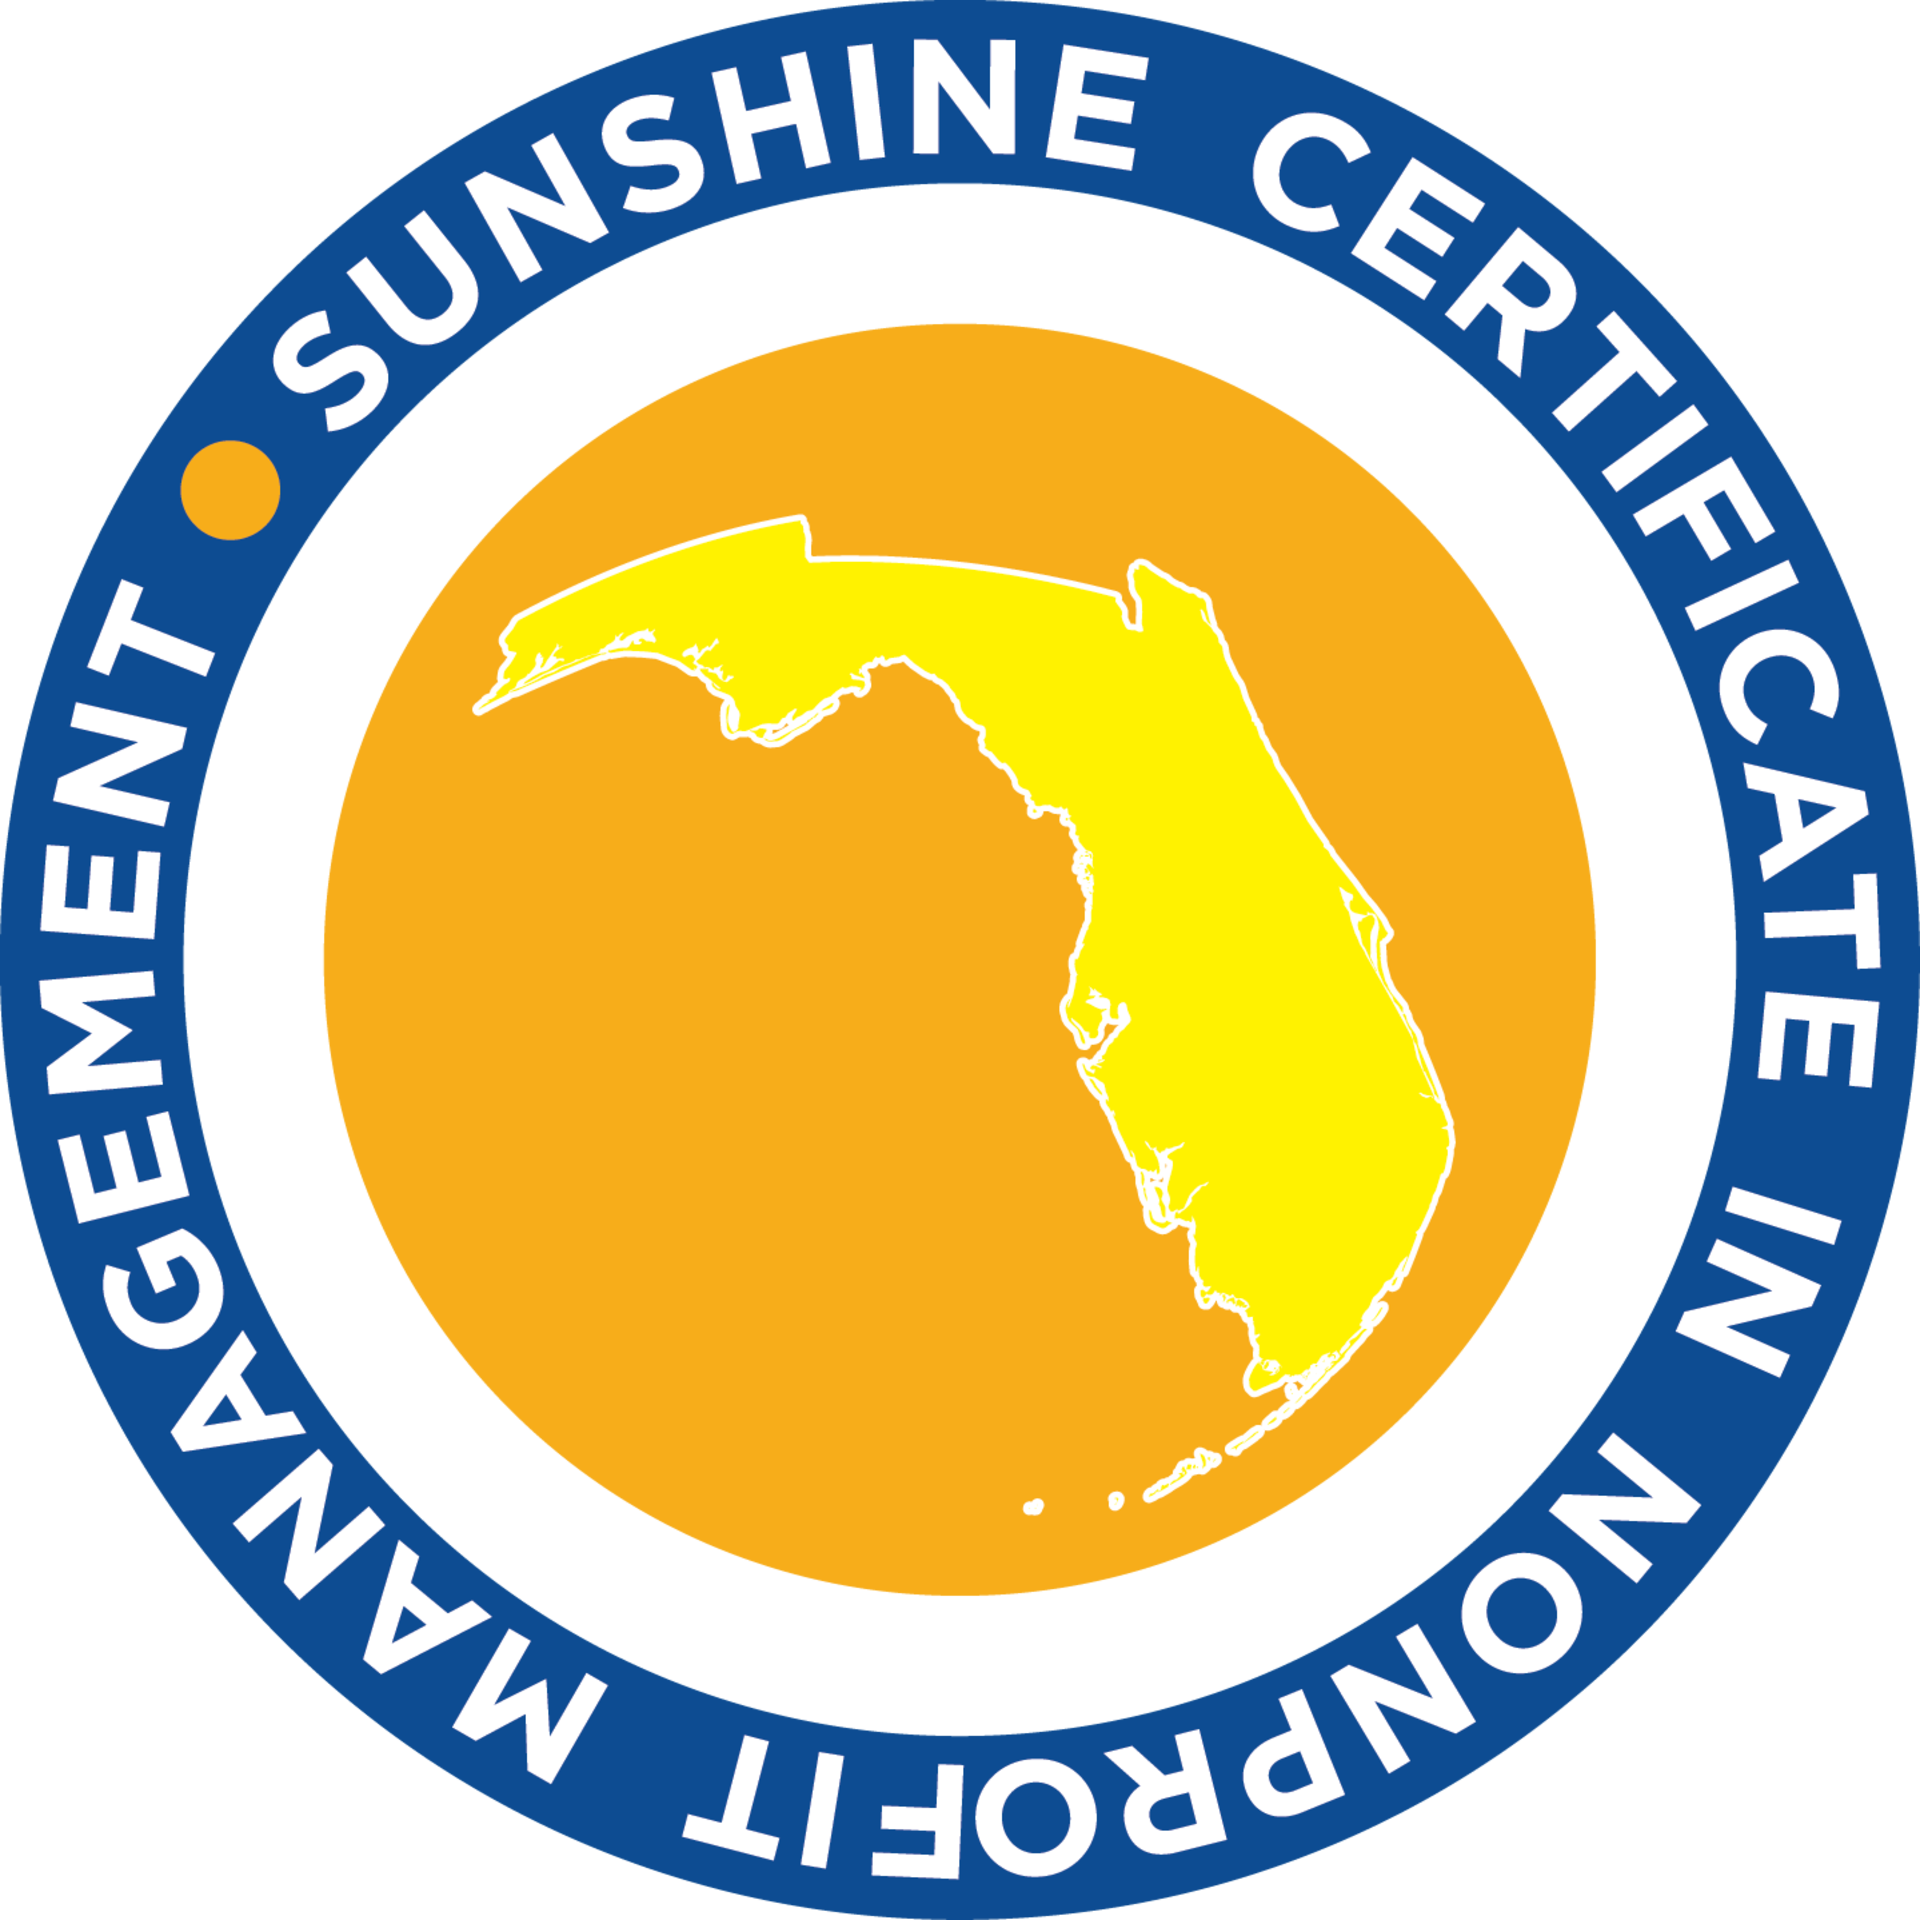  Florida Nonprofits’ Human Resources Class of the Sunshine Certificate in...